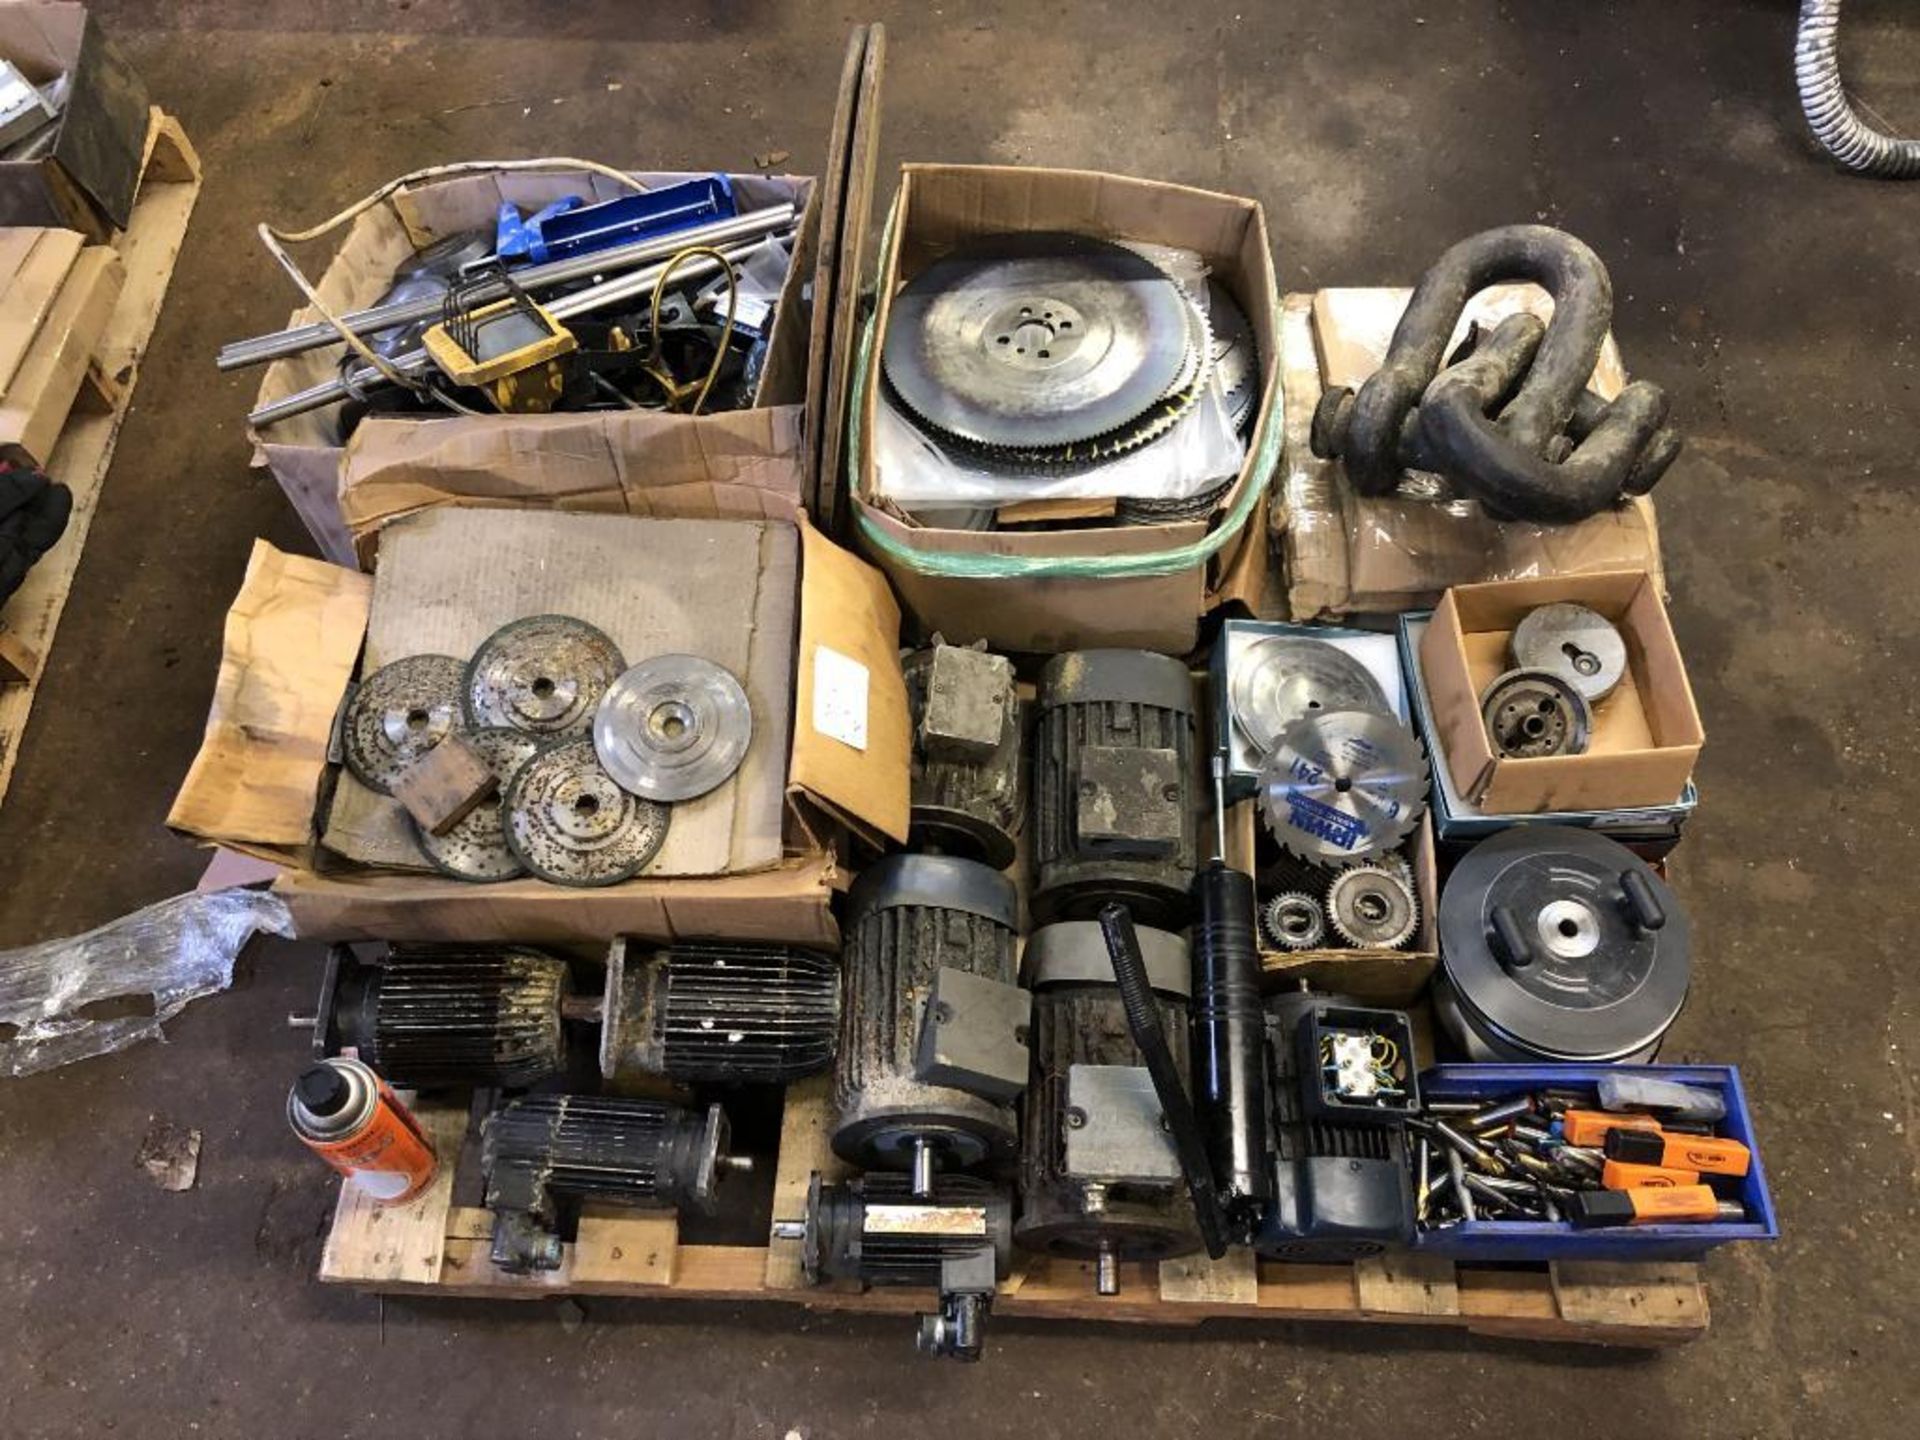 Lot c/o: Assorted Misc. Eletrical Motors, Drill Bits & Saw Blades on one skid